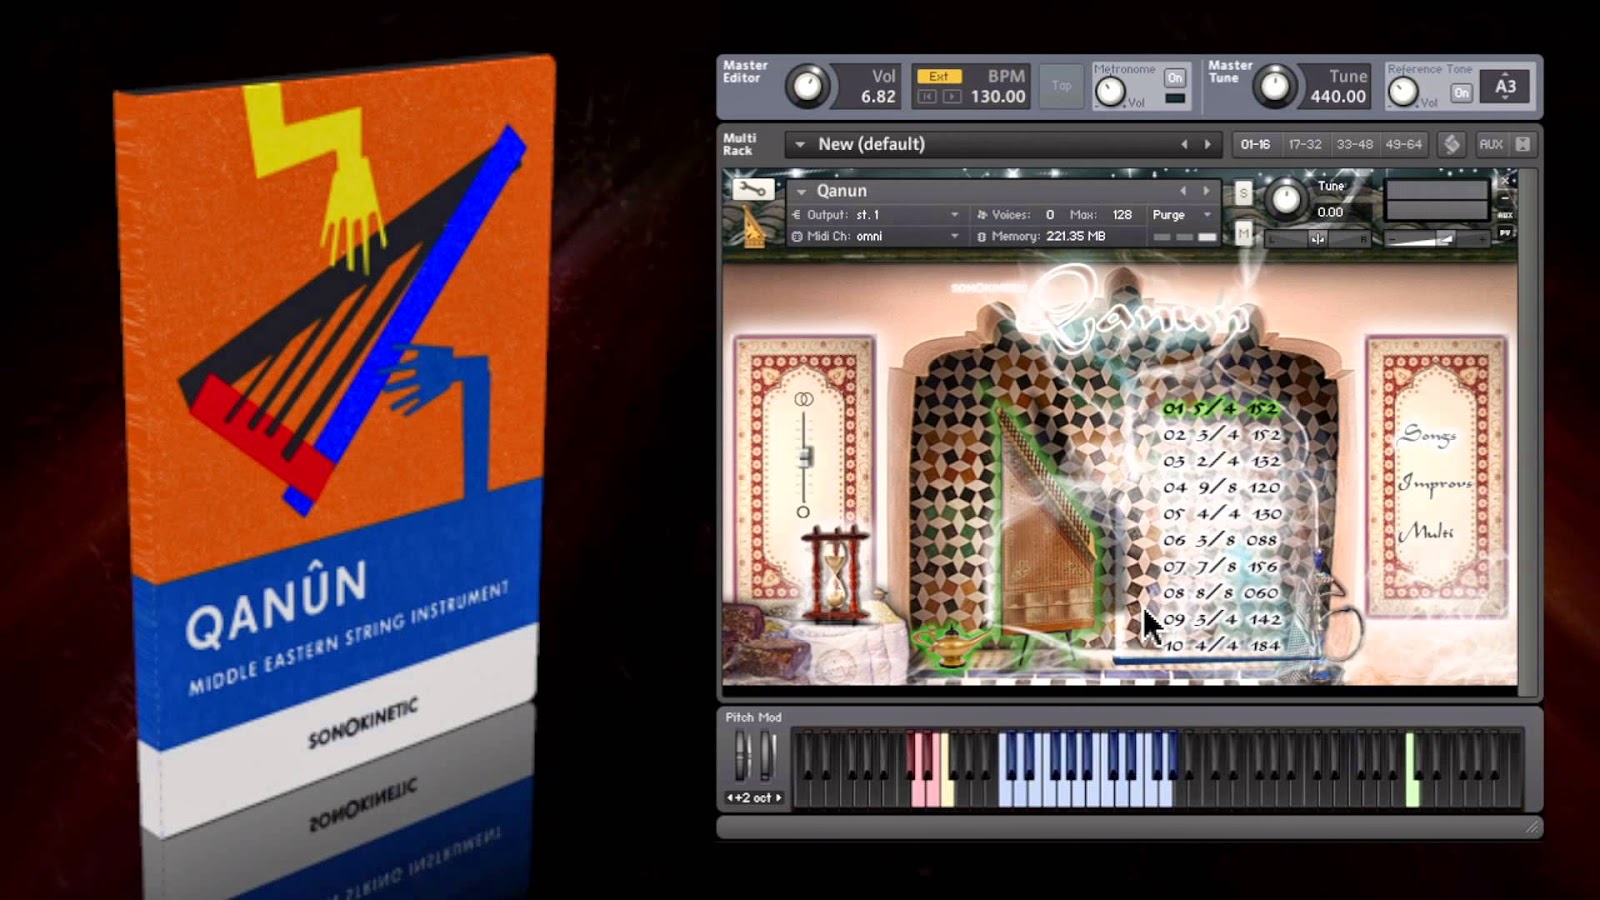 Real eight vst from musiclab free download torrent